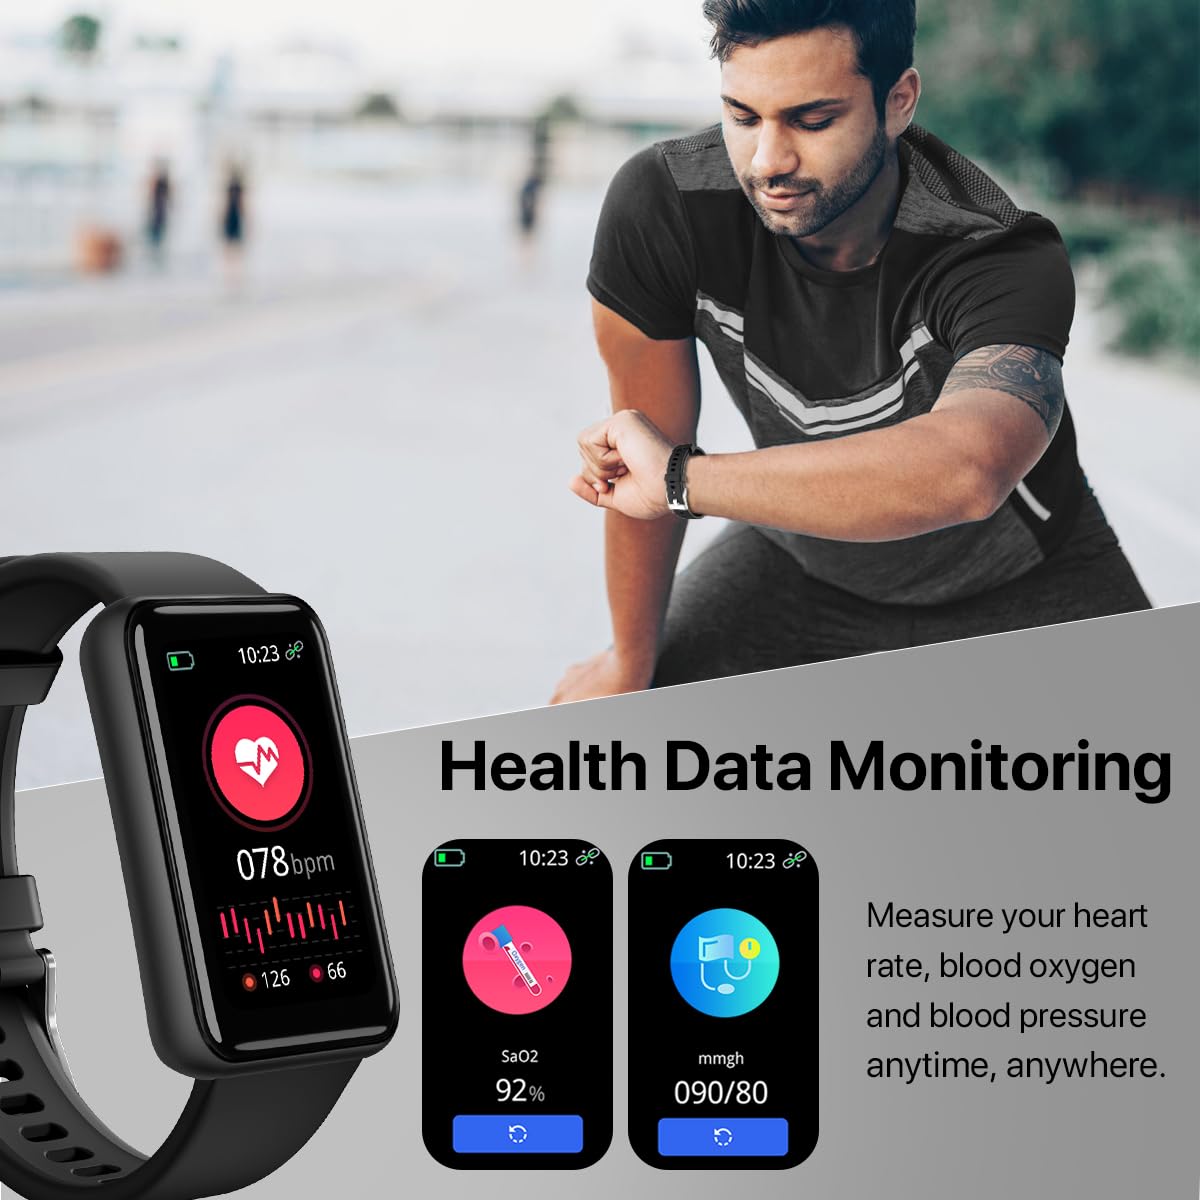 WalkerFit Fitness Tracker Watch for Men, Reloj Inteligente Hombre with Blood Pressure Heart Rate Sleep Monitor, Waterproof Activity Tracker and Android Smart Watch for iPhone, Step Tracker, Pedometer